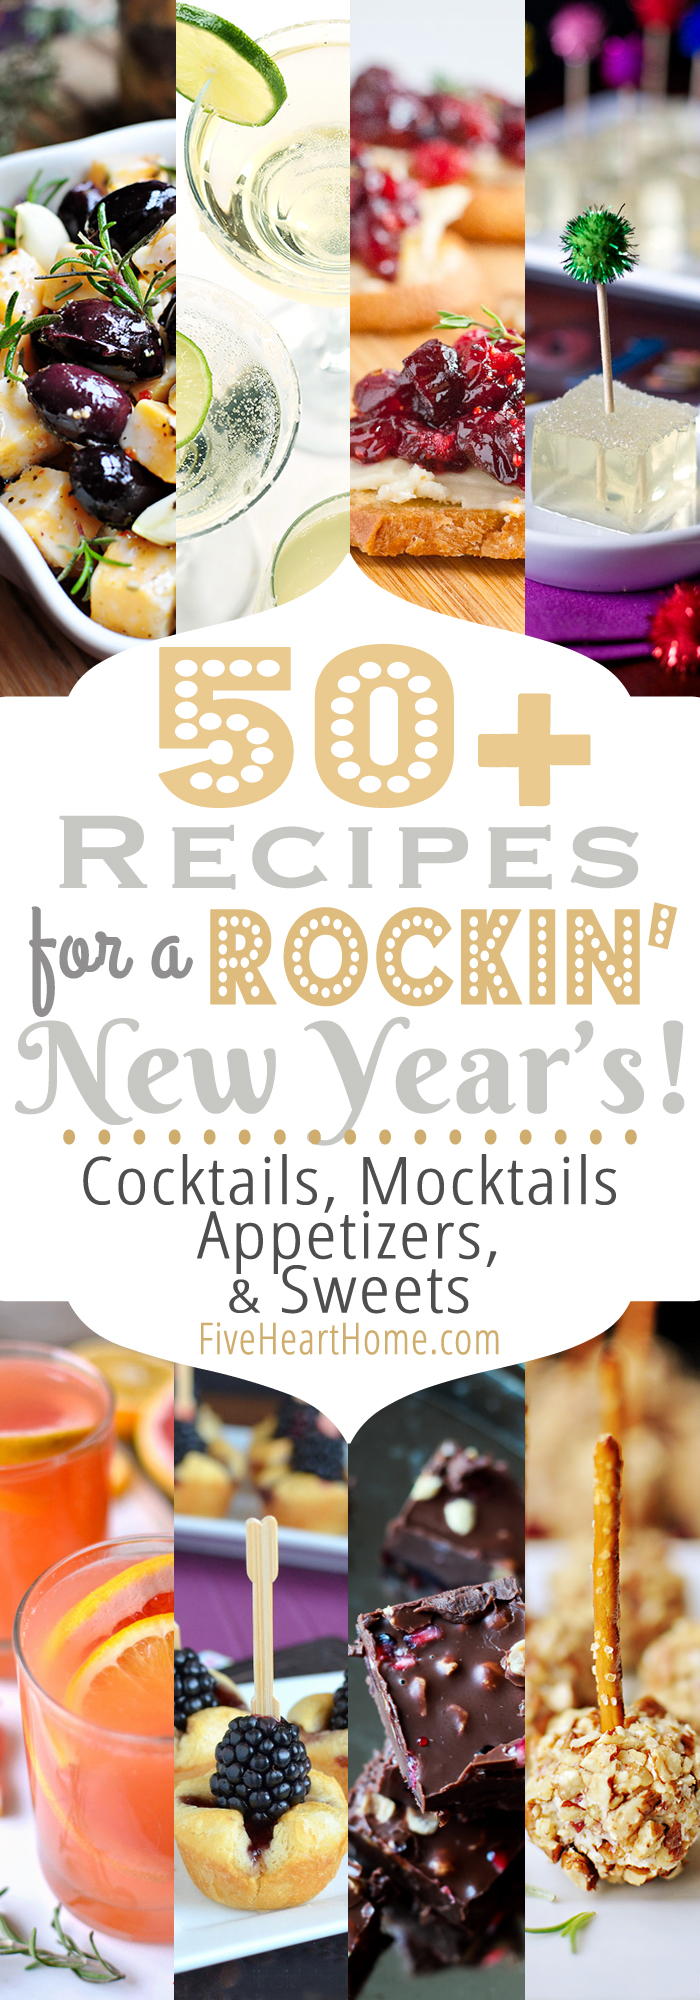 New-Years-Eve-Recipes-Cocktails-Mocktails-Appetizers-Sweets-by-Five-Heart-Home_700pxCollage2